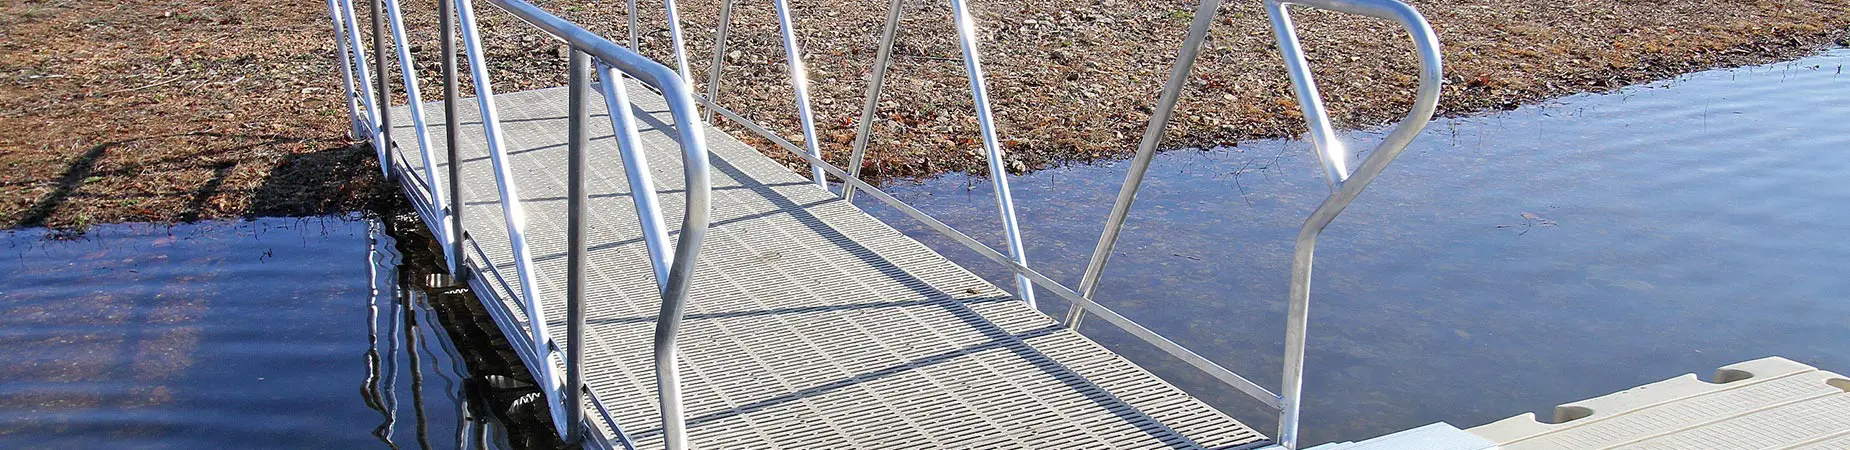 Walkway with railing connecting to dock